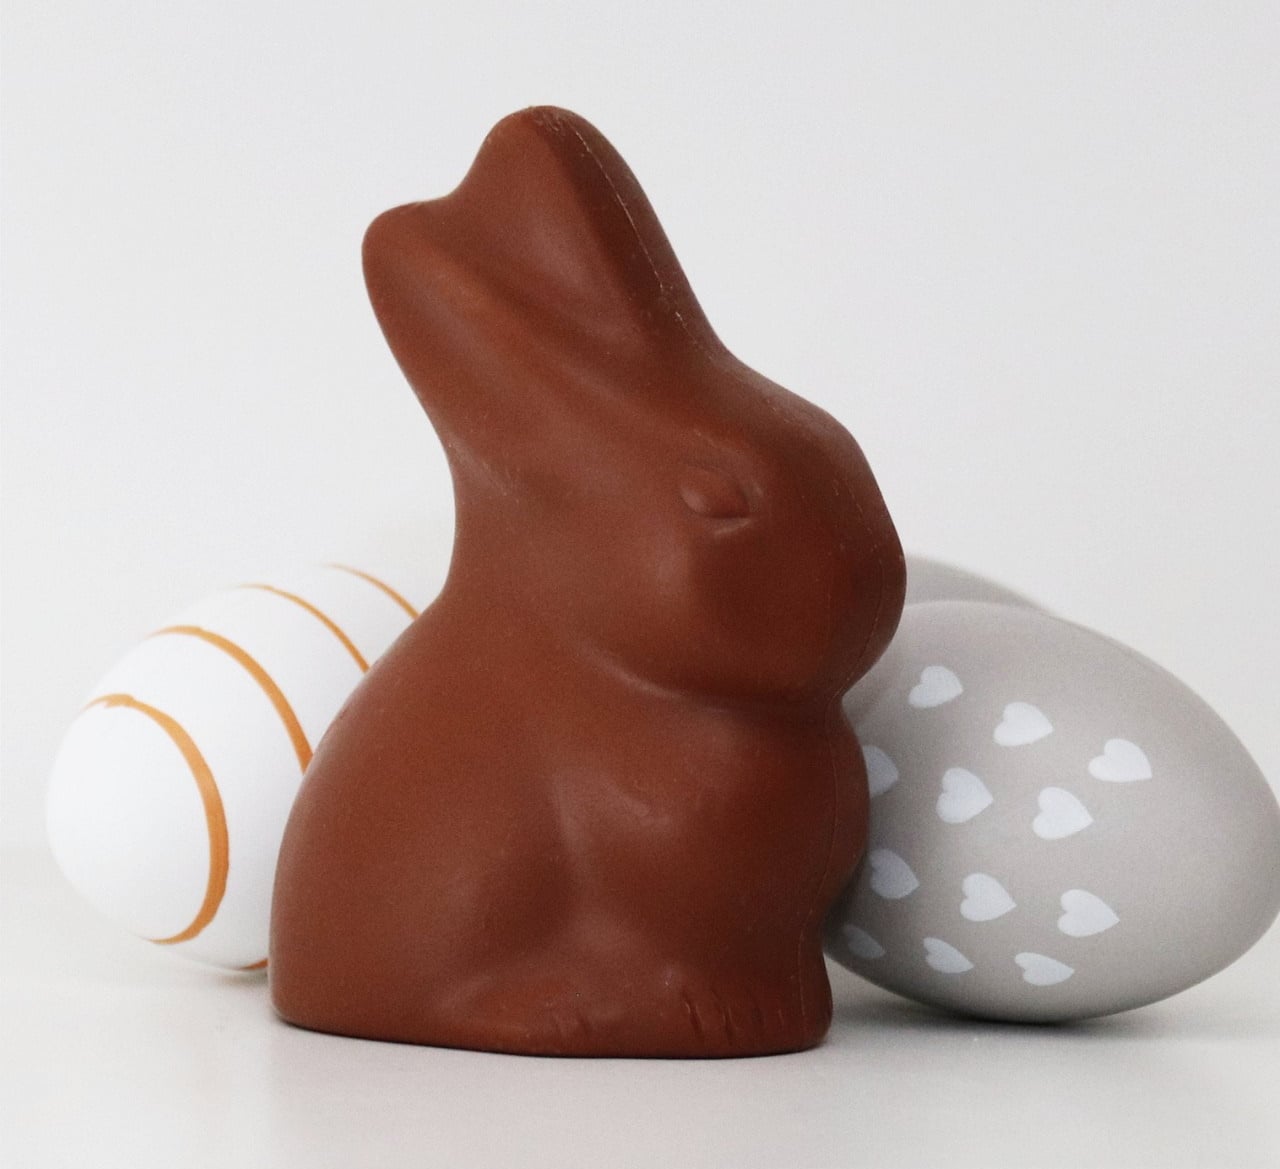 Keep your pet safe at Easter and keep chocolate bunny's out of reach